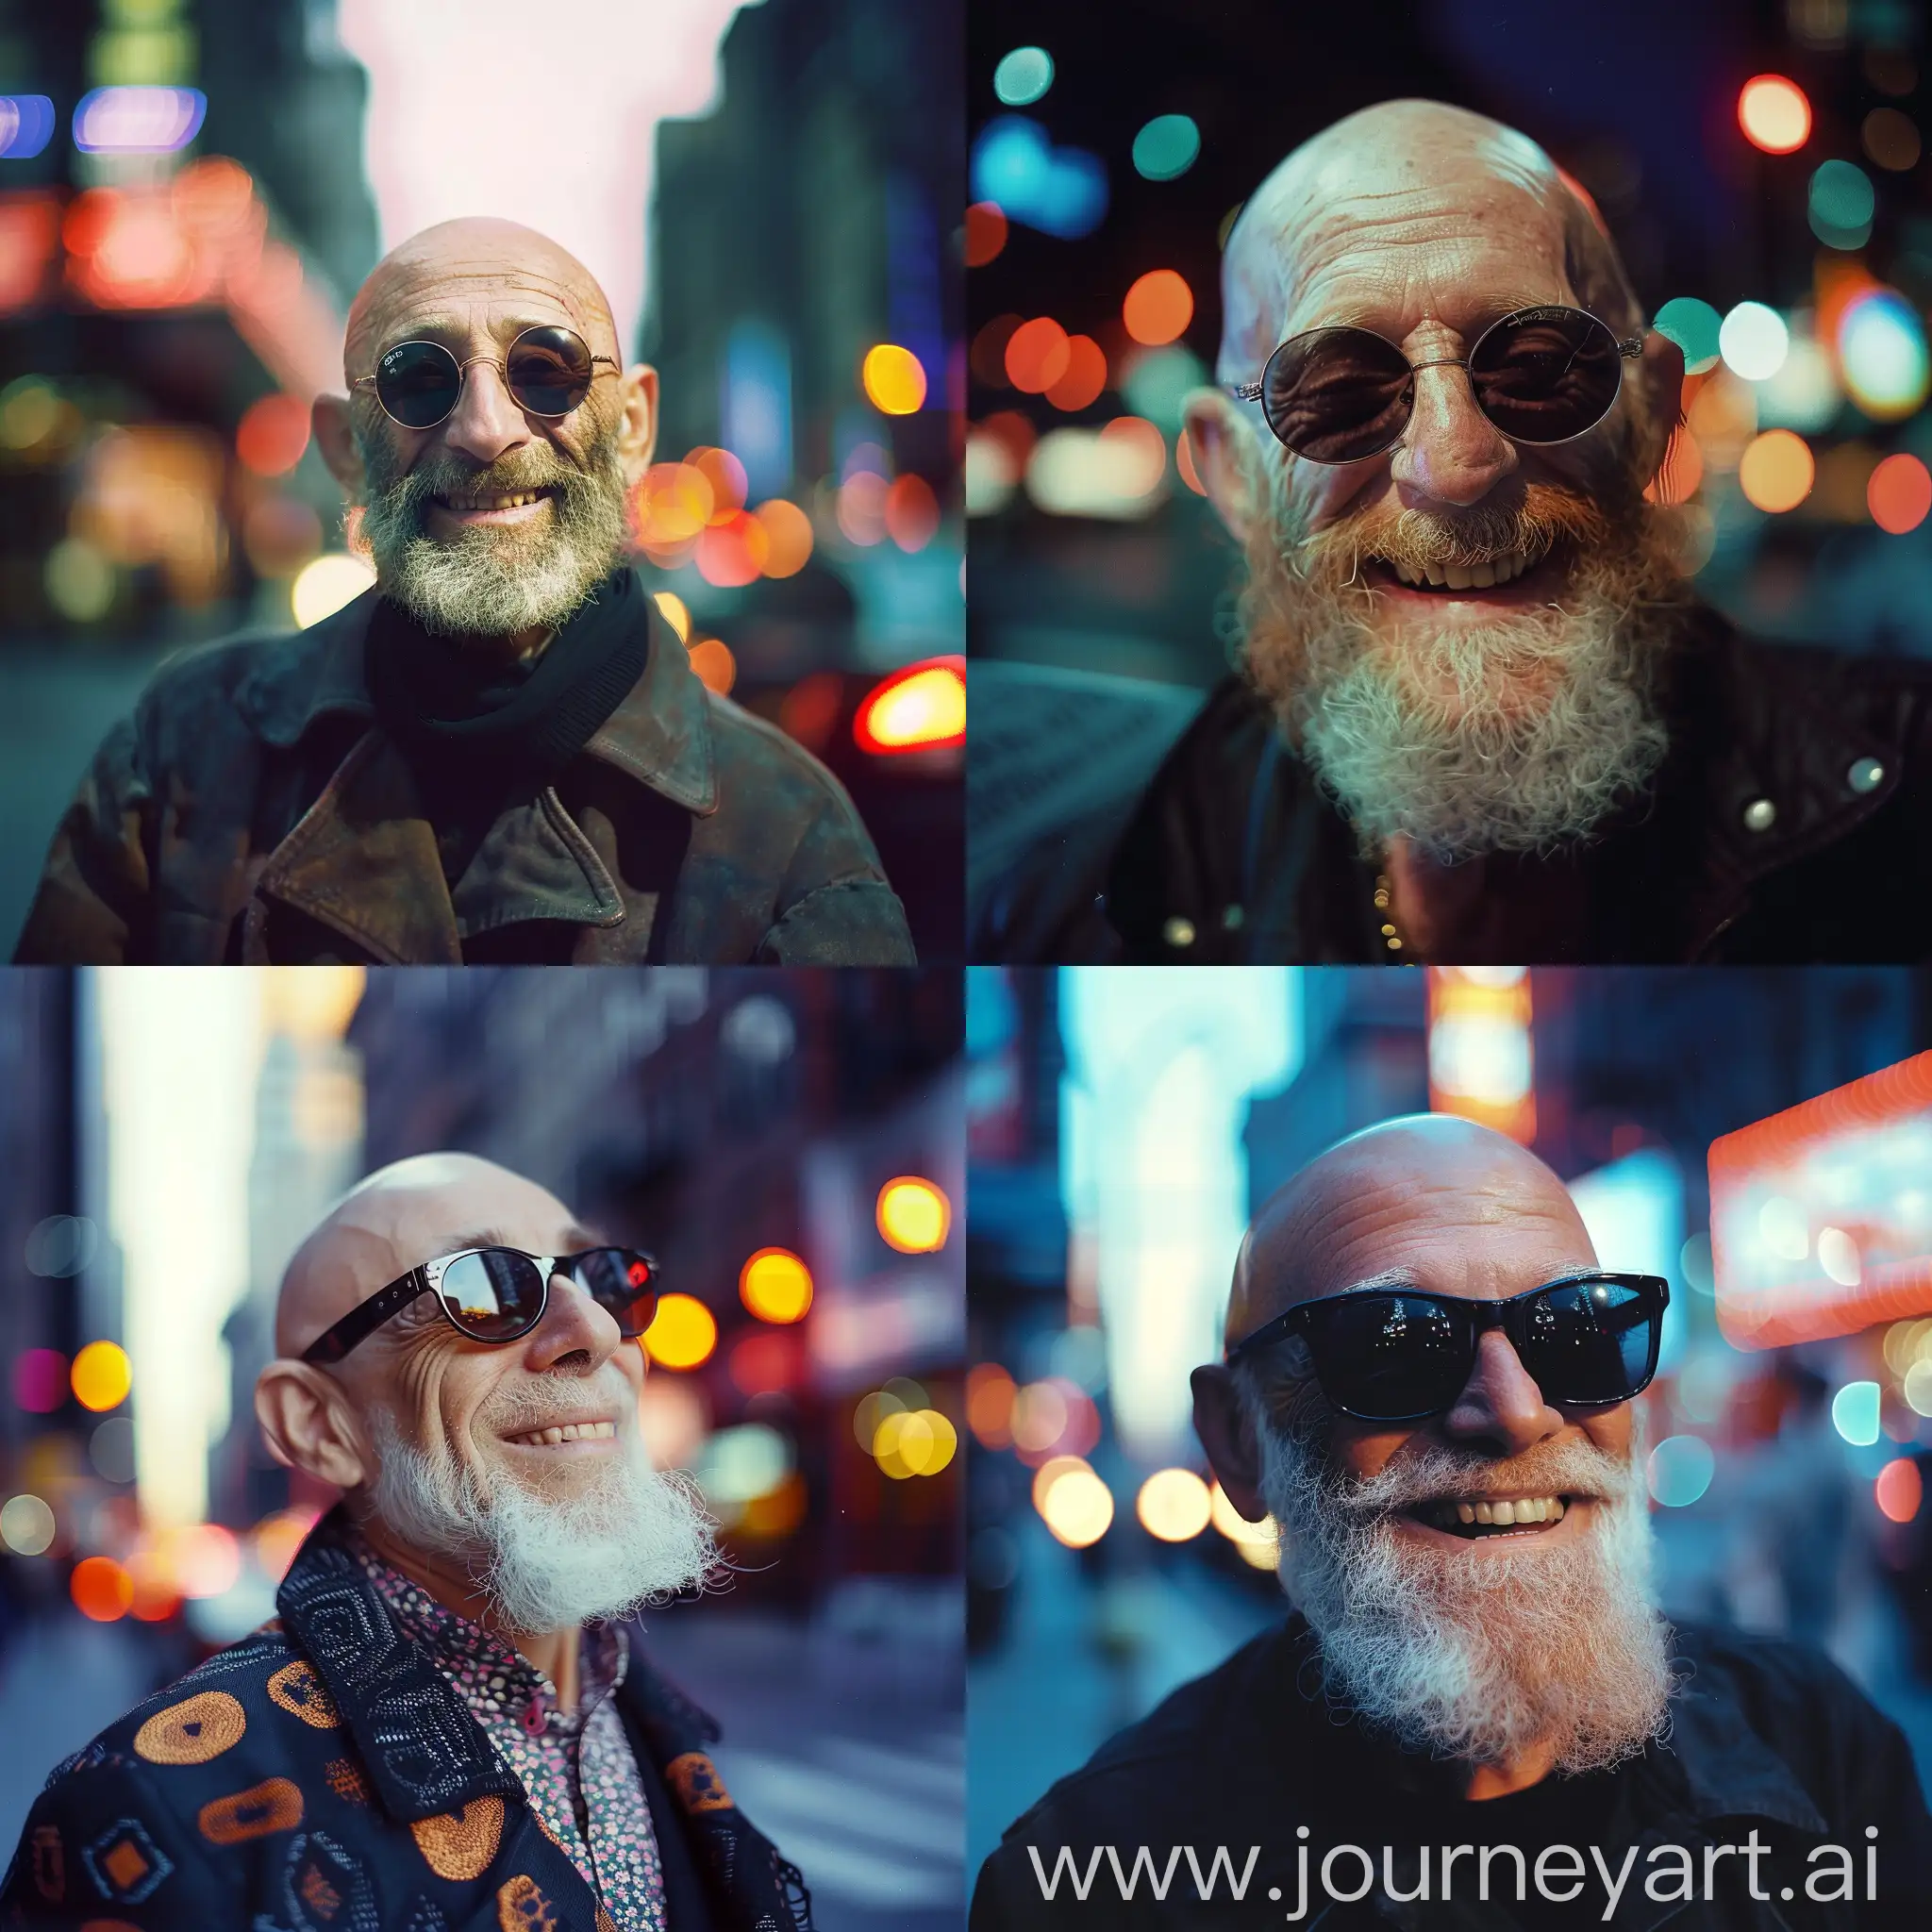 Smiling, bald, bearded old man with sunglasses, in the style of vaporpunk, pop inspo, photo taken with provia, cobra, iconic, candid moments captured, city lights bokeh